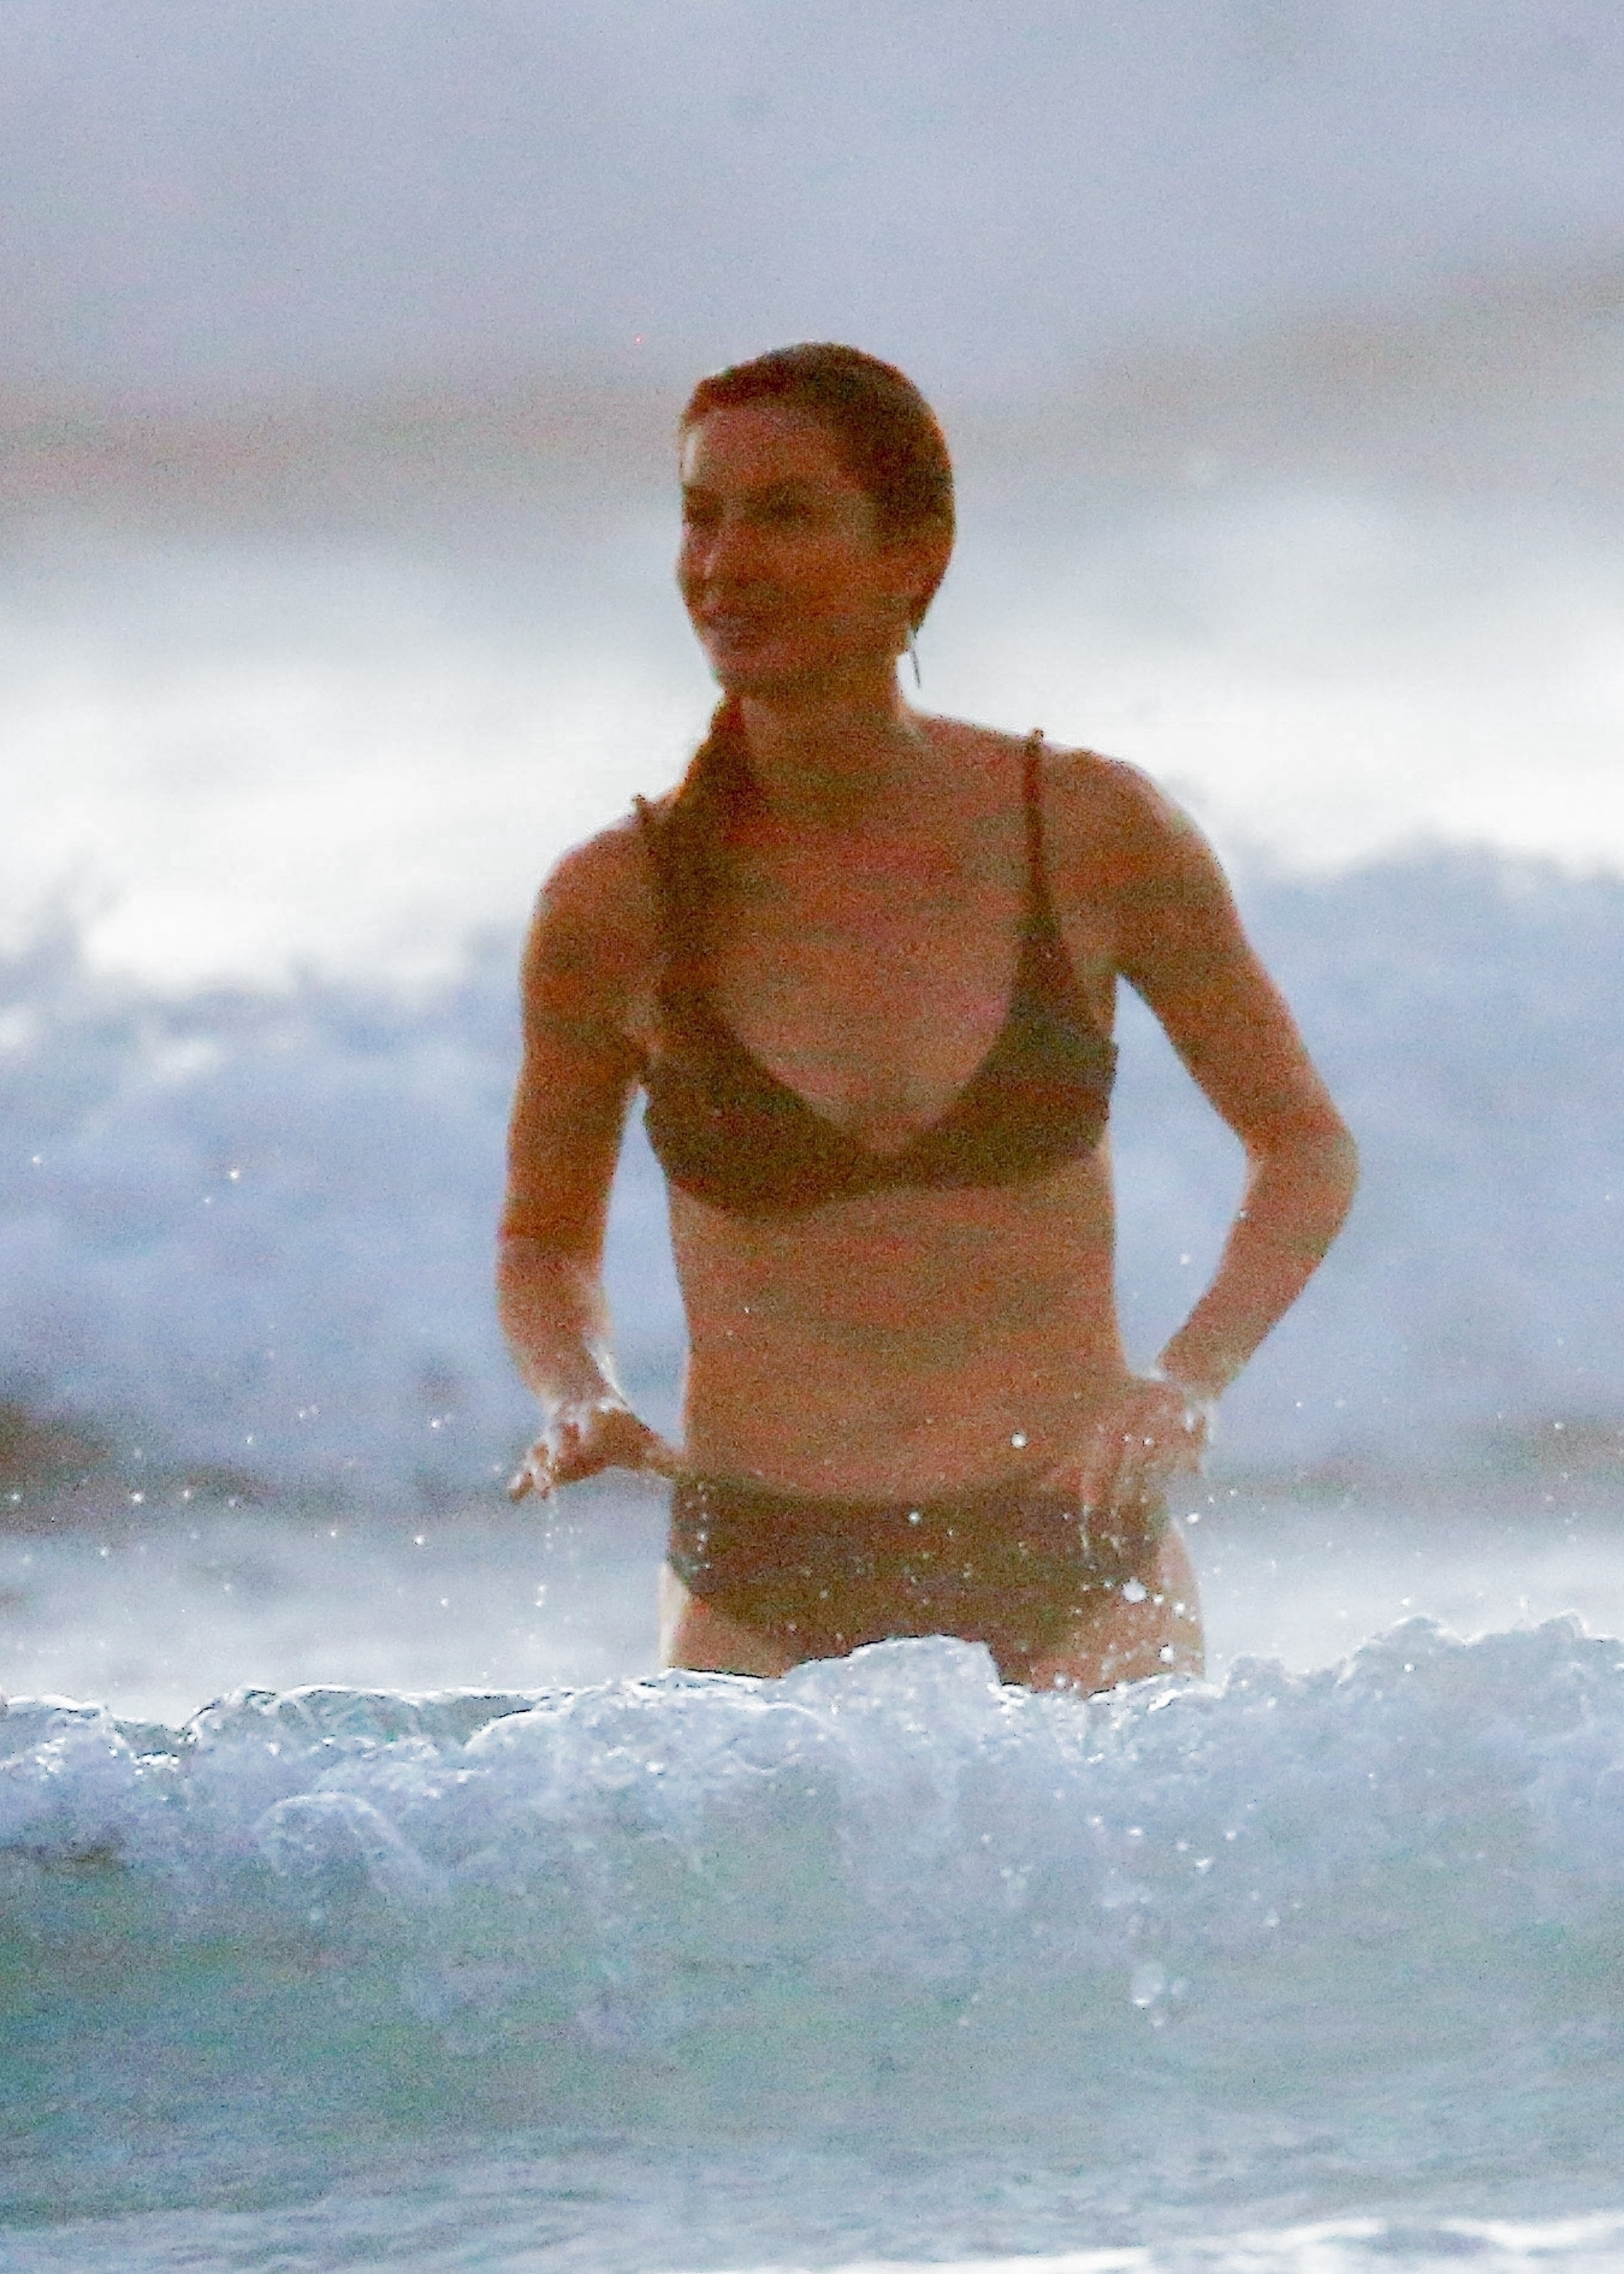 <p><a href="https://www.wonderwall.com/celebrity/profiles/overview/gisele-bundchen-286.article">Gisele Bundchen</a> looked carefree while taking a dip in Costa Rica on Jan. 11. </p>